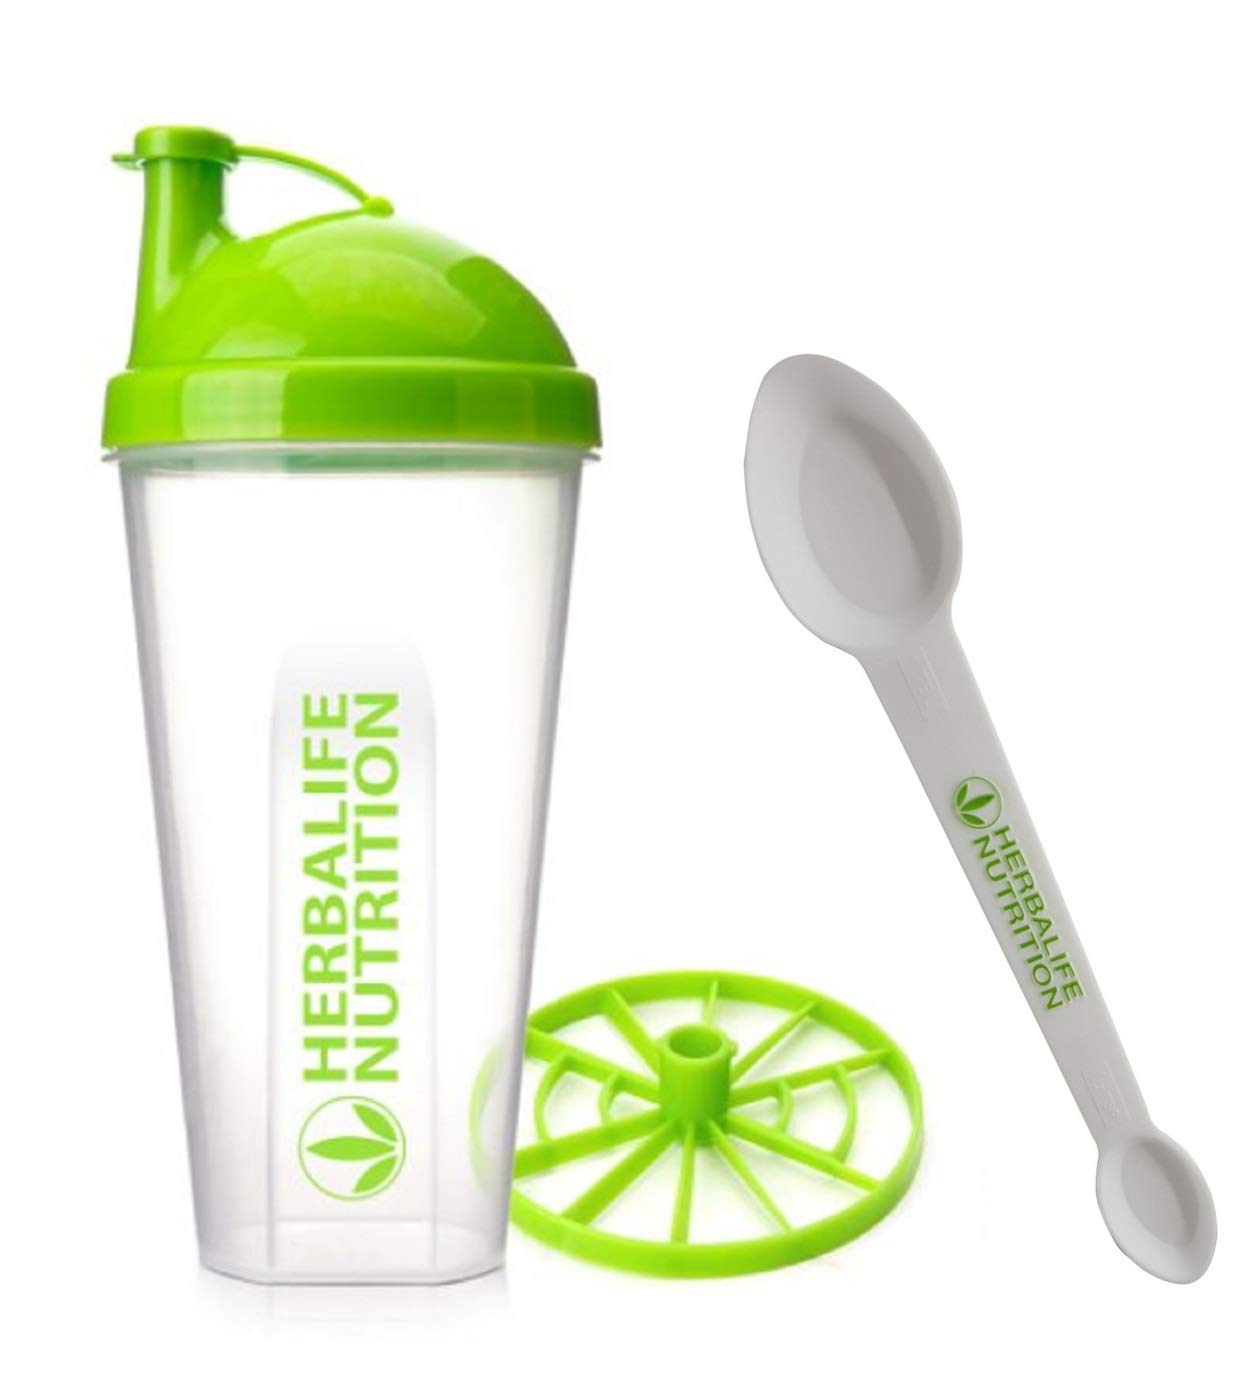 Herbalife Shaker Bottle 13.5-Ounce(400ml) with Blender and Herbalife Spoon 1 pack